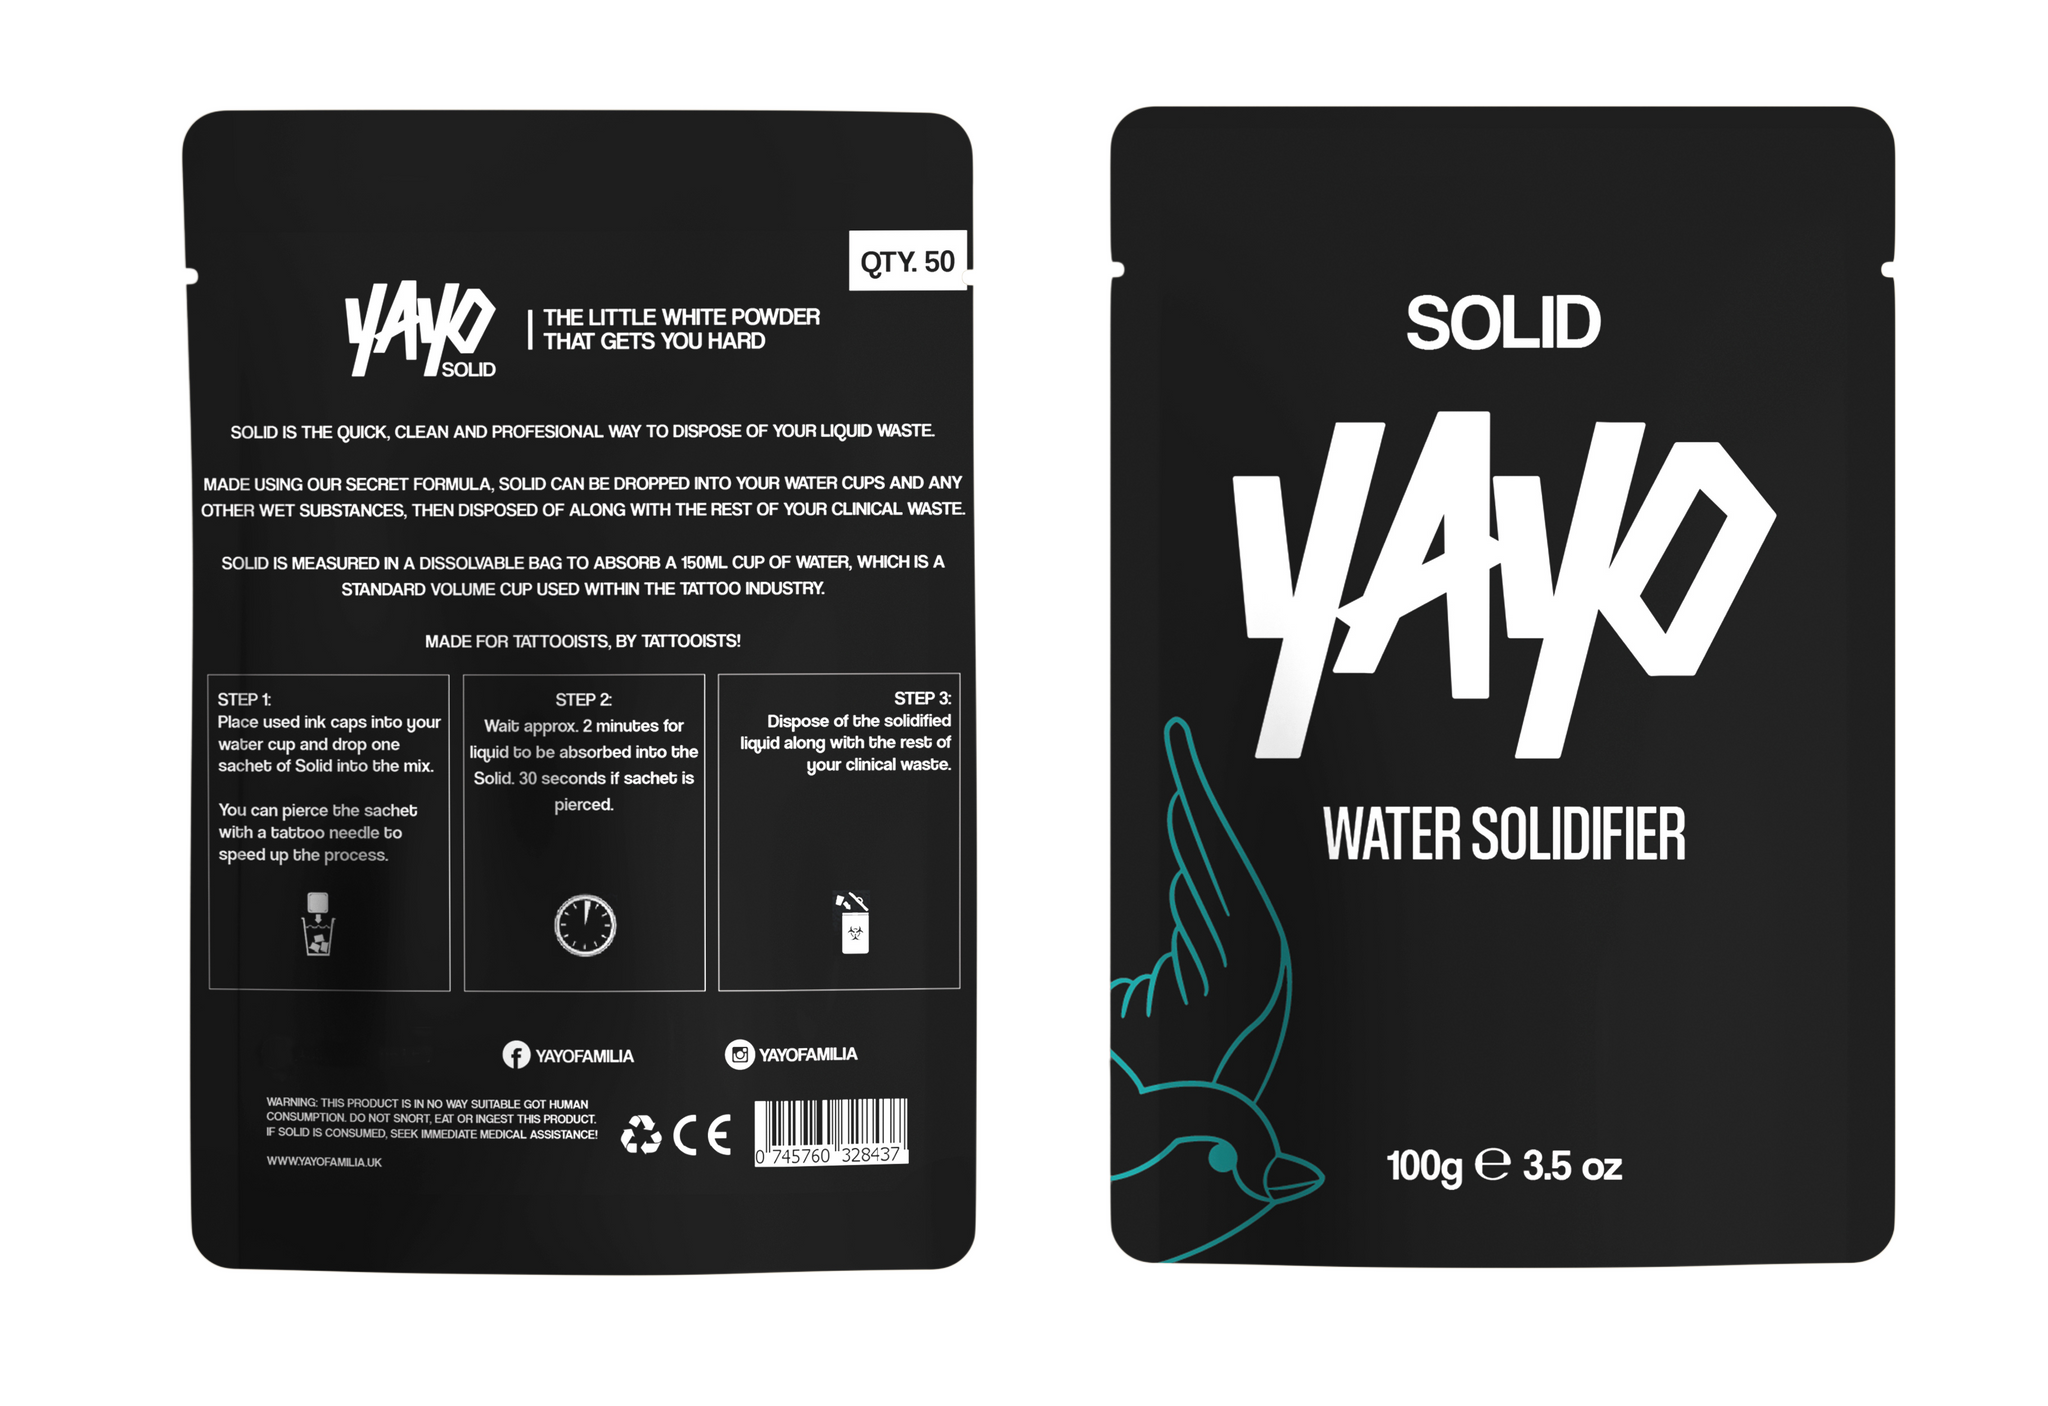 Solid Water Solidifier